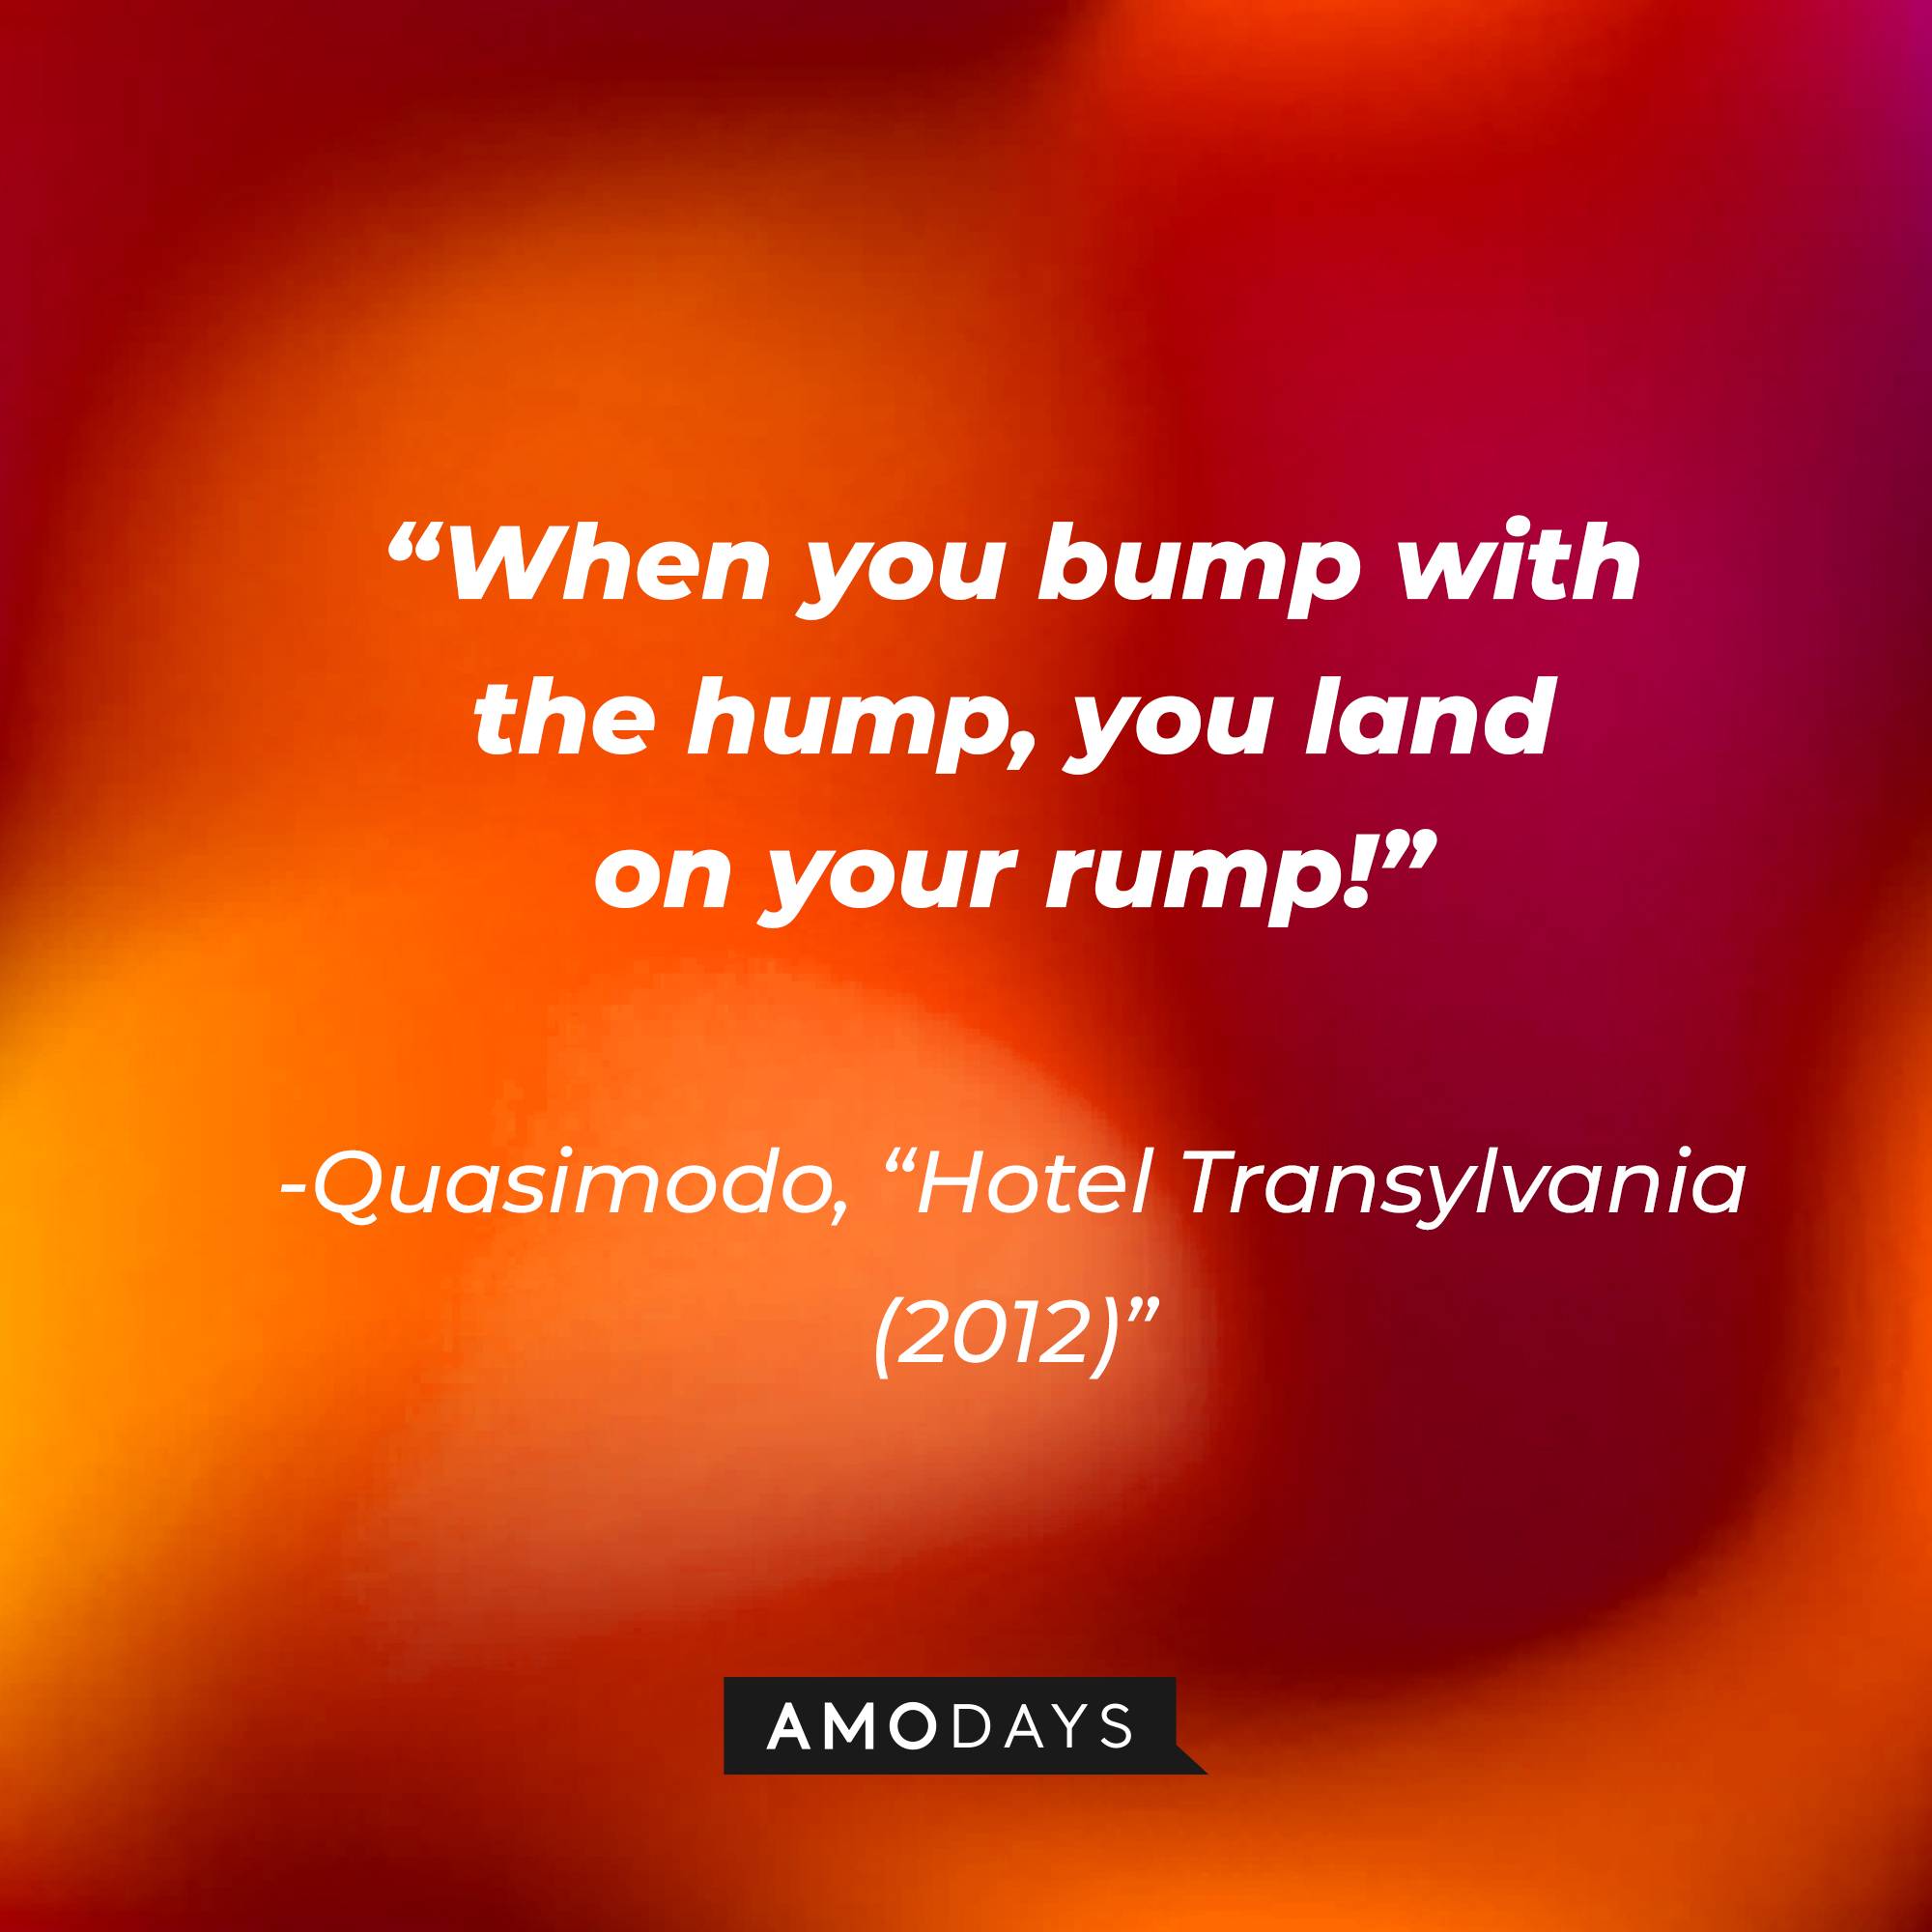 Quasimodo's quote: “When you bump with the hump, you land on your rump!” | Source: Amodays